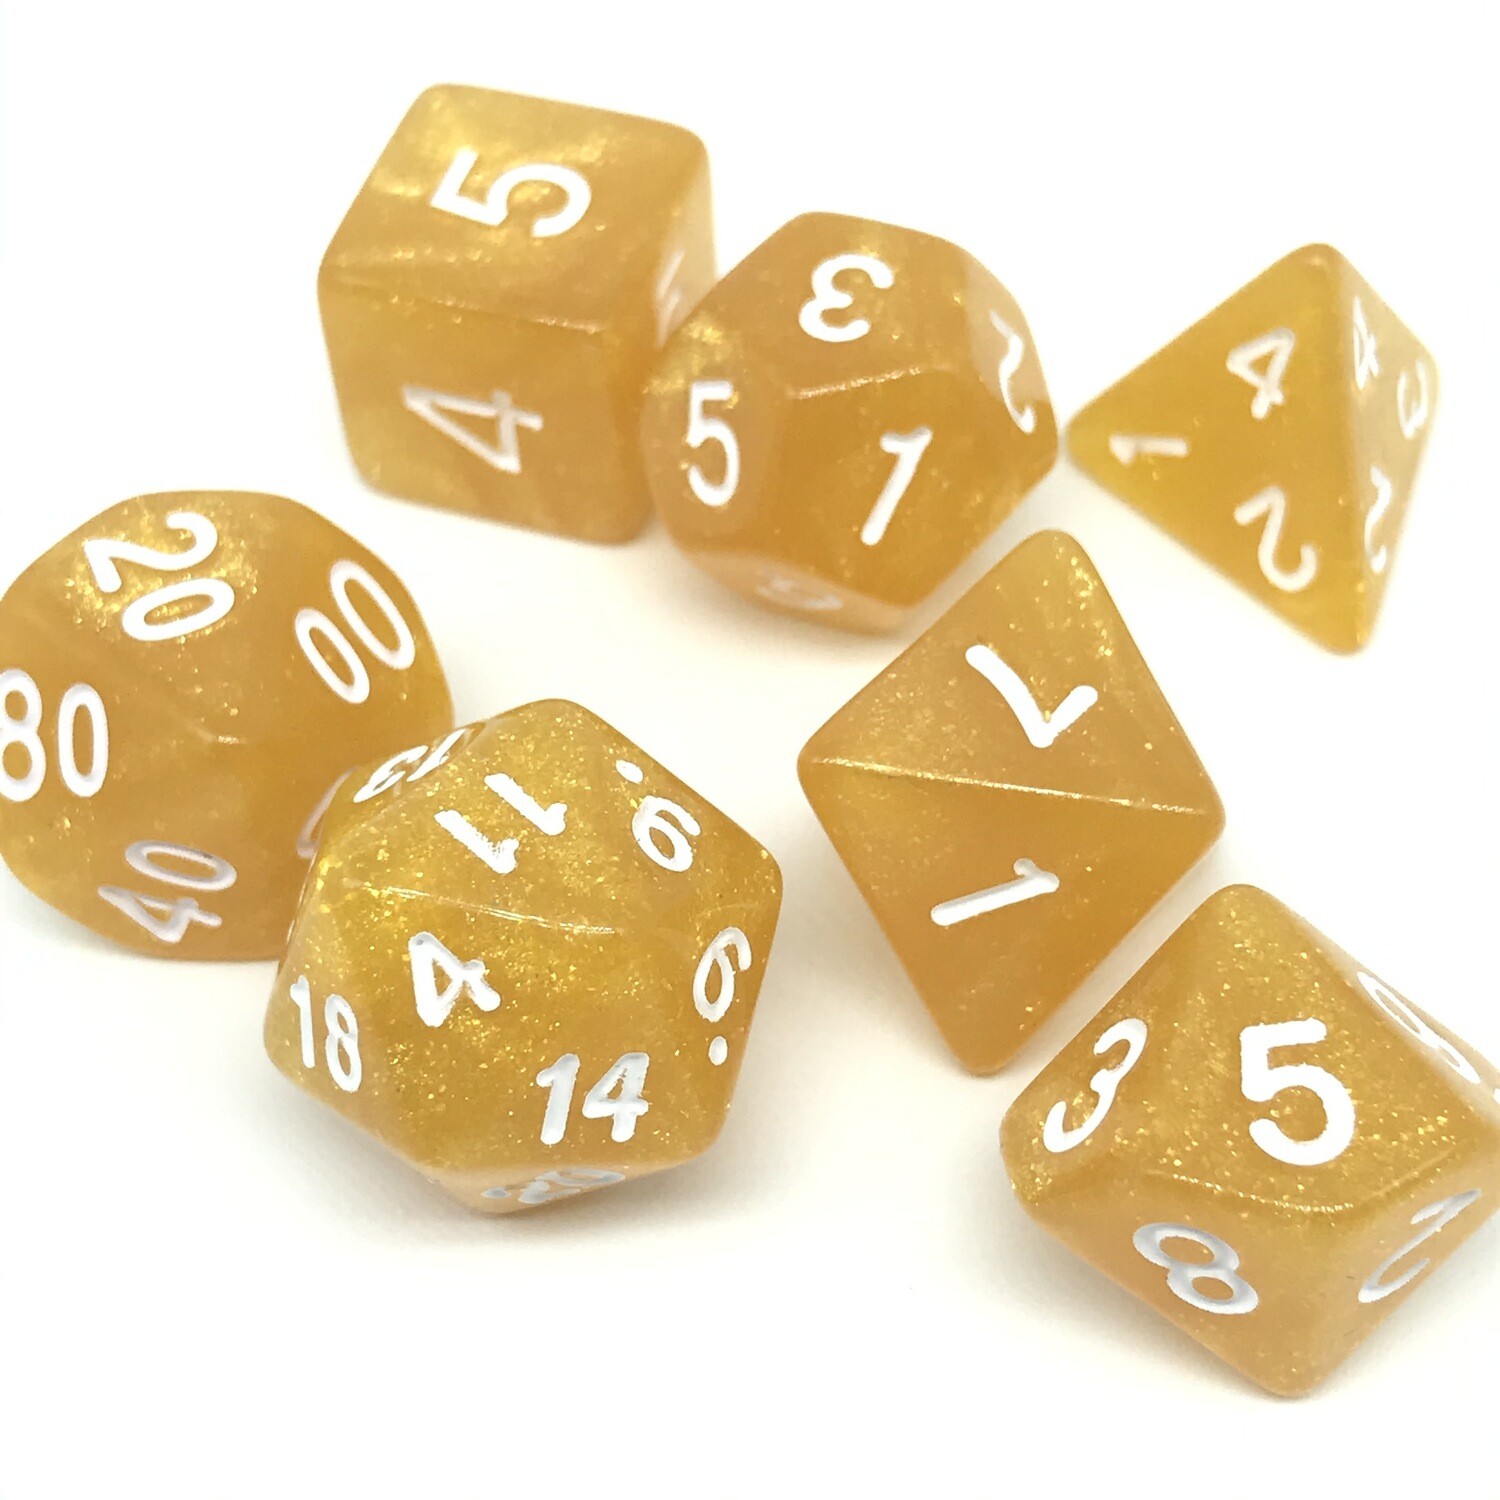 Dice Set - Yellow-gold sparkly with white numbers